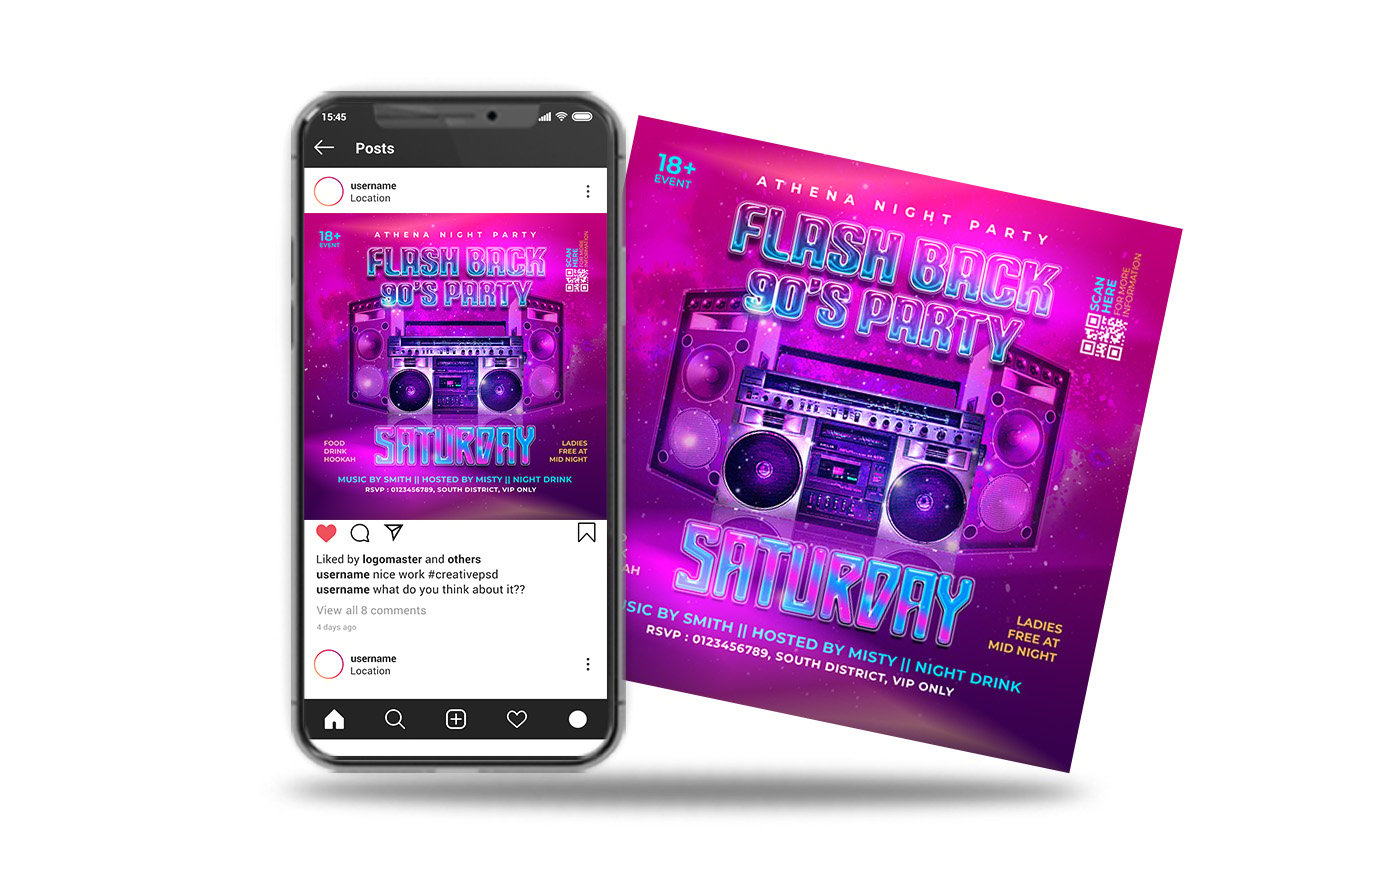 club dj night party 90's party media post and flyer template